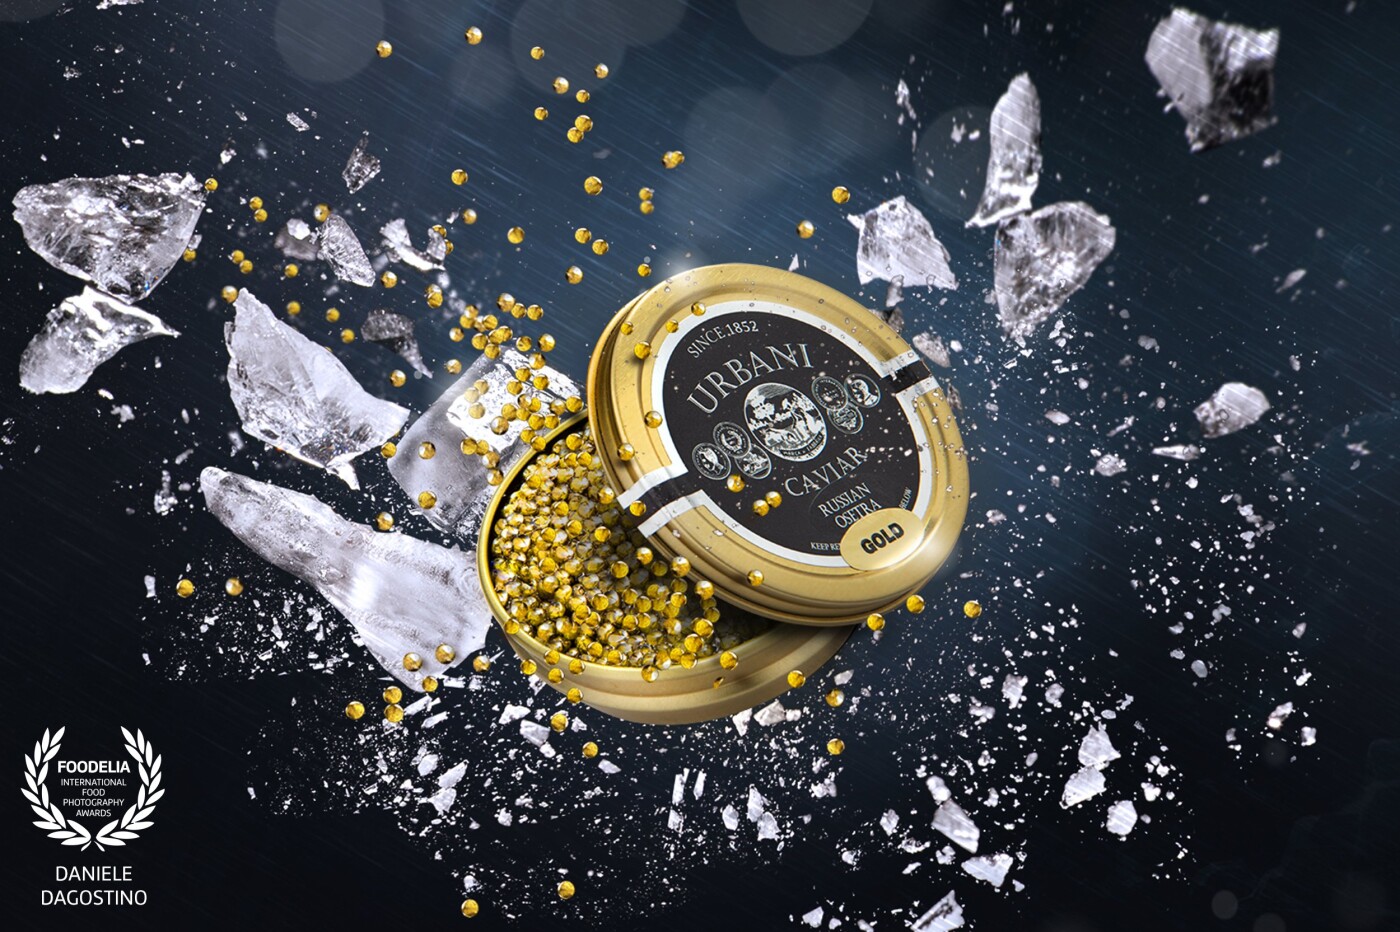 A "crash" of caviar and ice for an explosion of flavor.<br />
Multi-layer technique for this work.<br />
Client: Urbani Truffle- NY<br />
Shoot by Nikon d810+ nikkor 24-70 + Hensel contra flash.